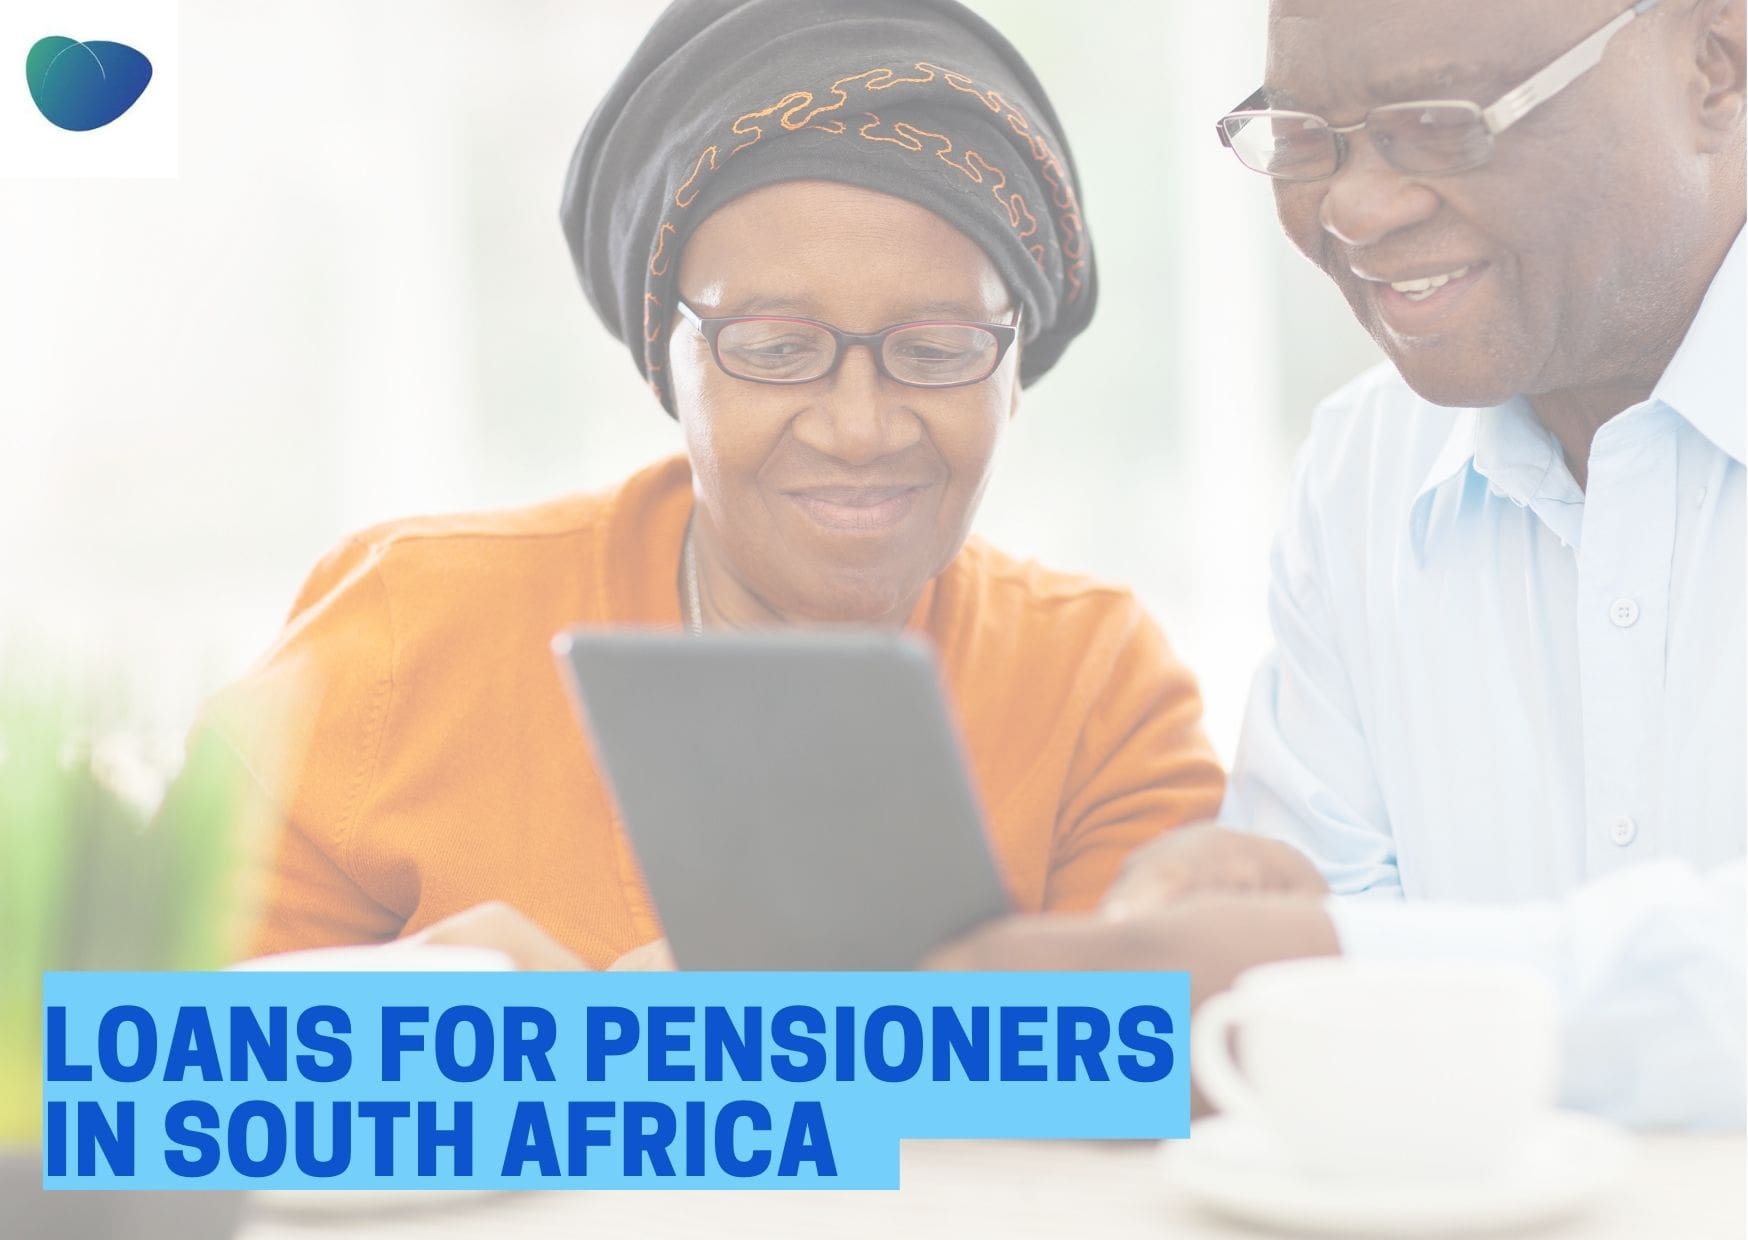 loans-for-pensioners-in-south-africa-loanspot-io-south-africa